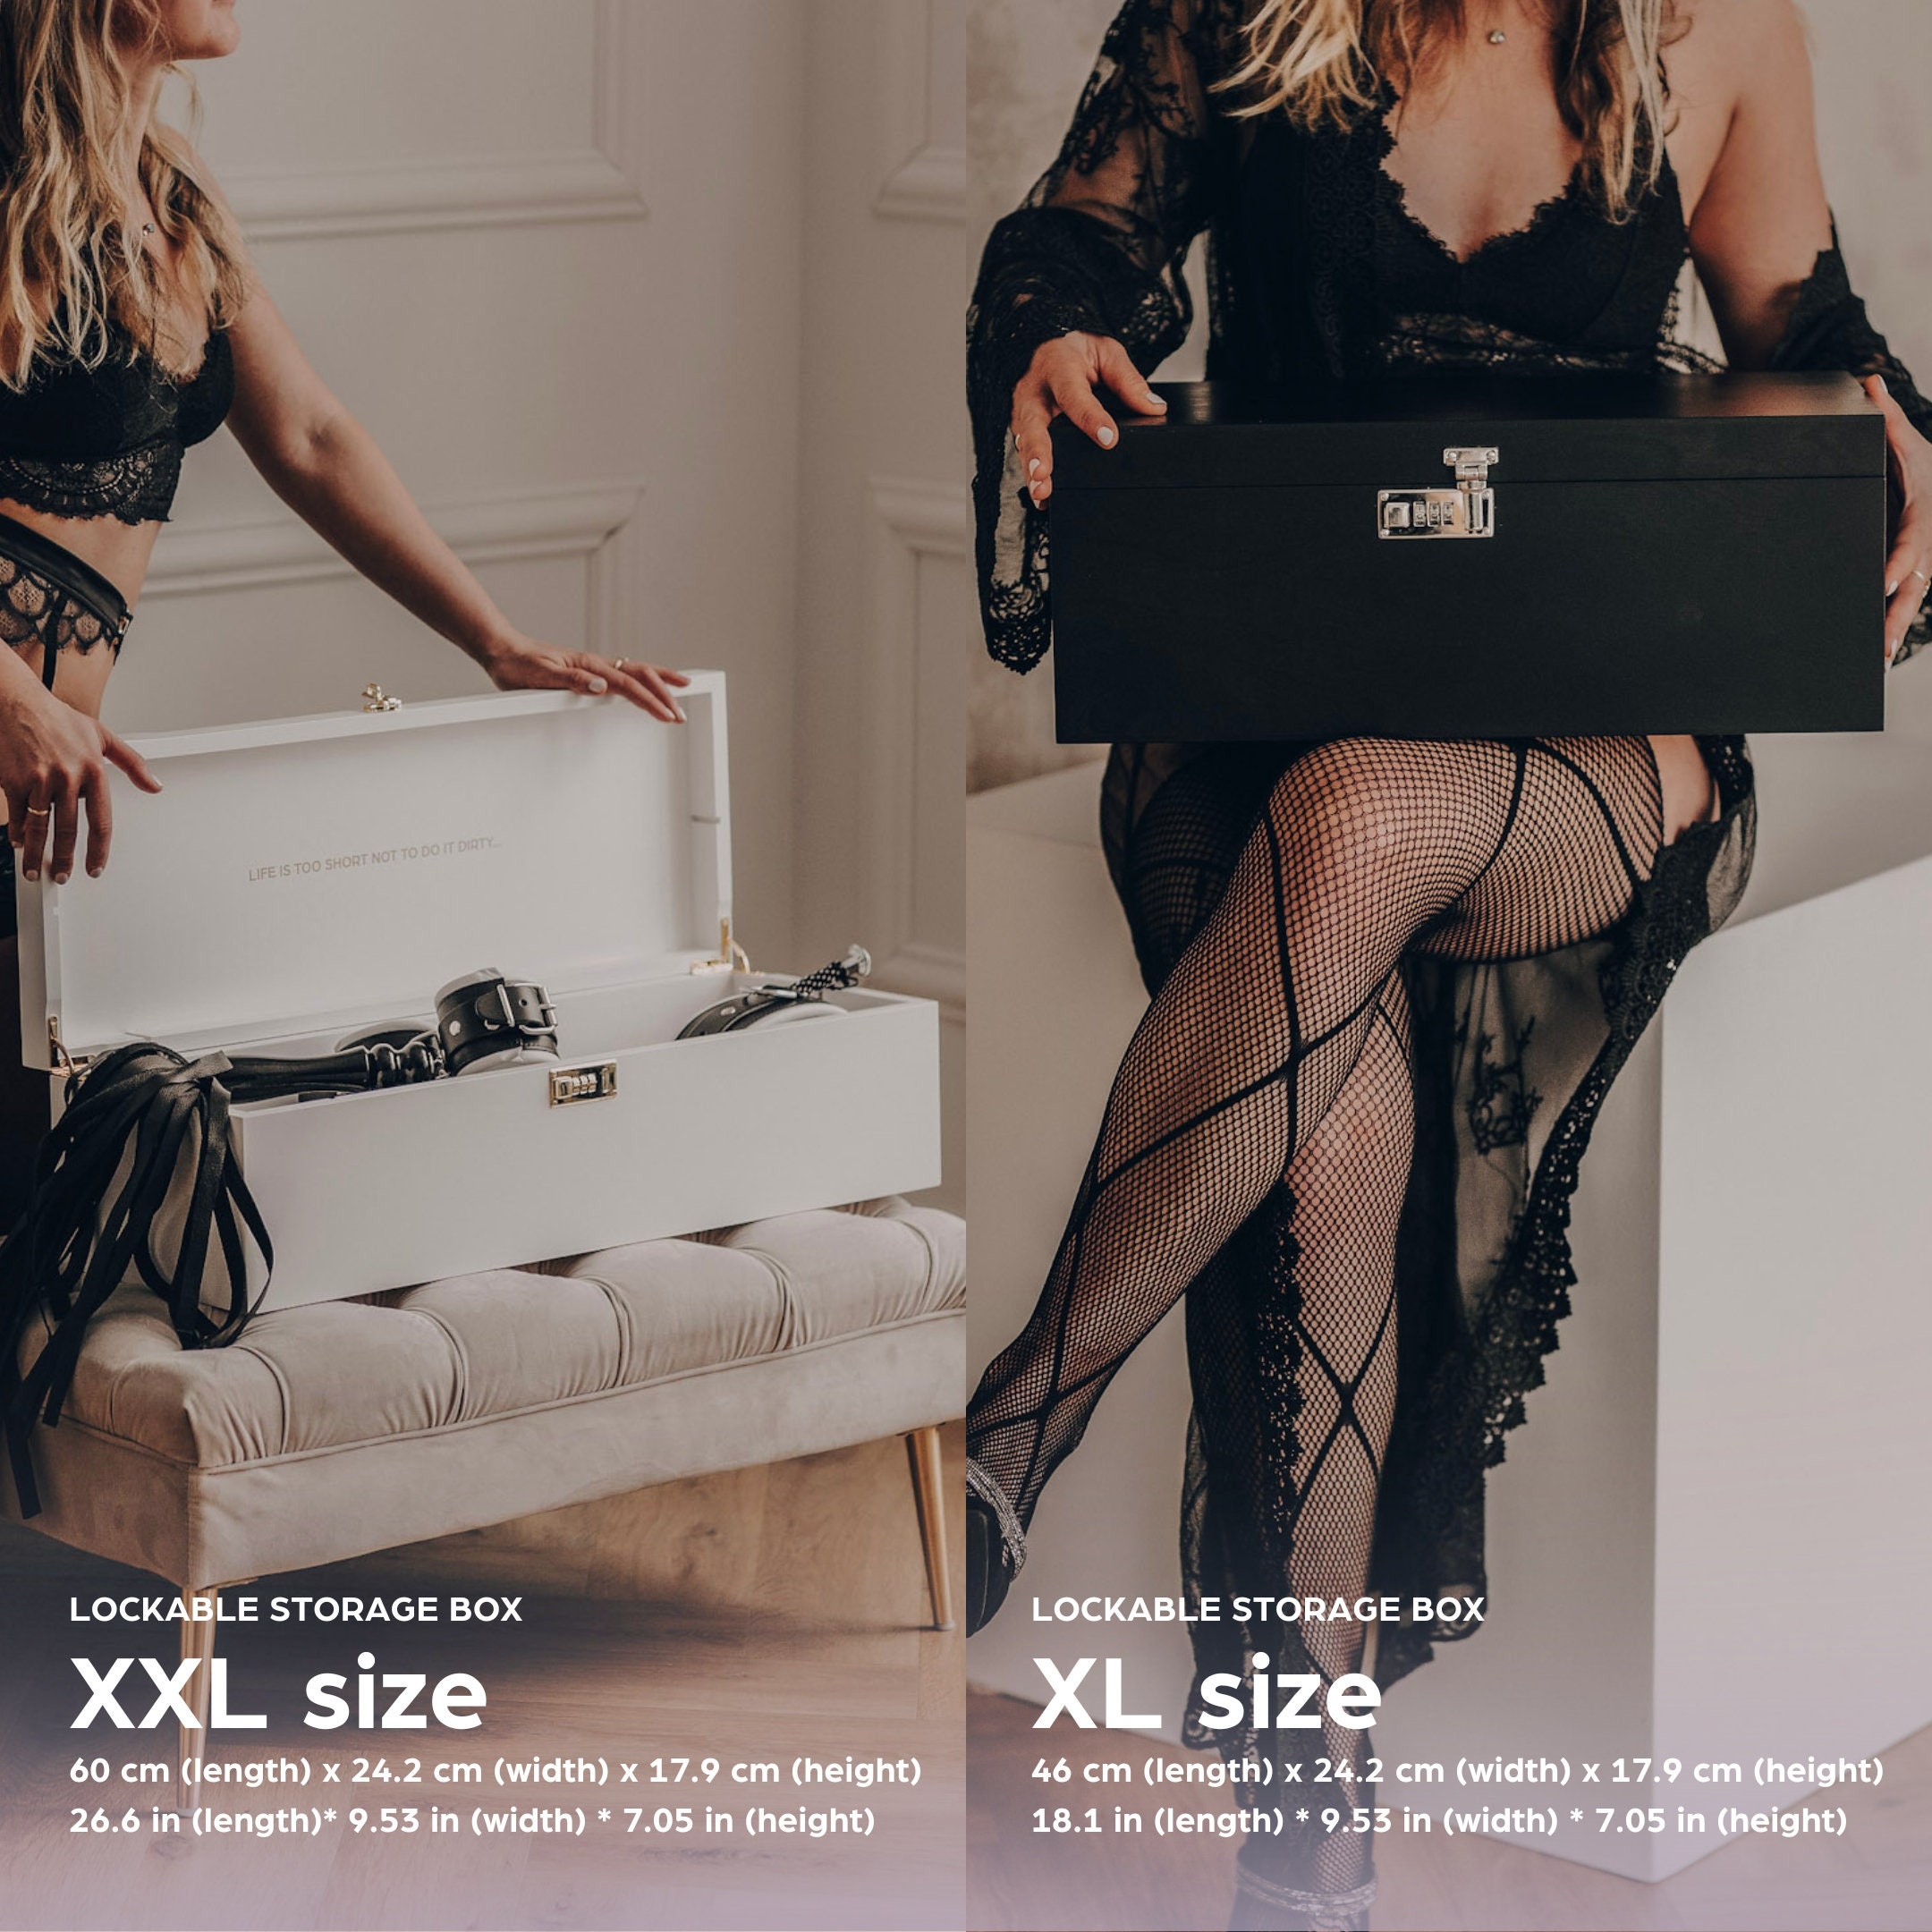 Lockable Adult Toy Storage Box Large Size, Sexy Valentines Gift -   Canada